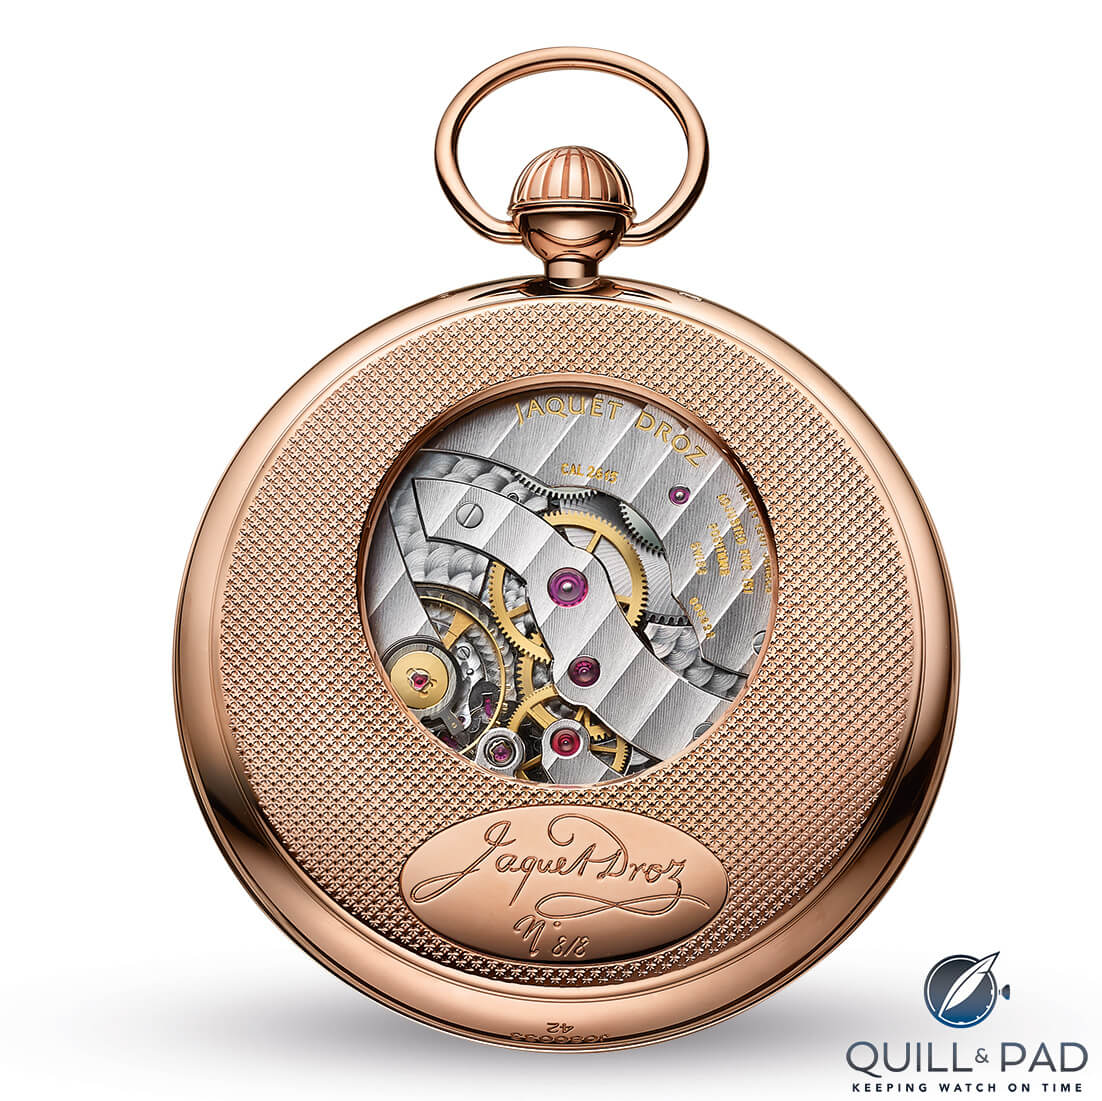 View from the back of the Jaquet Droz Pocket Watch Paillonnée